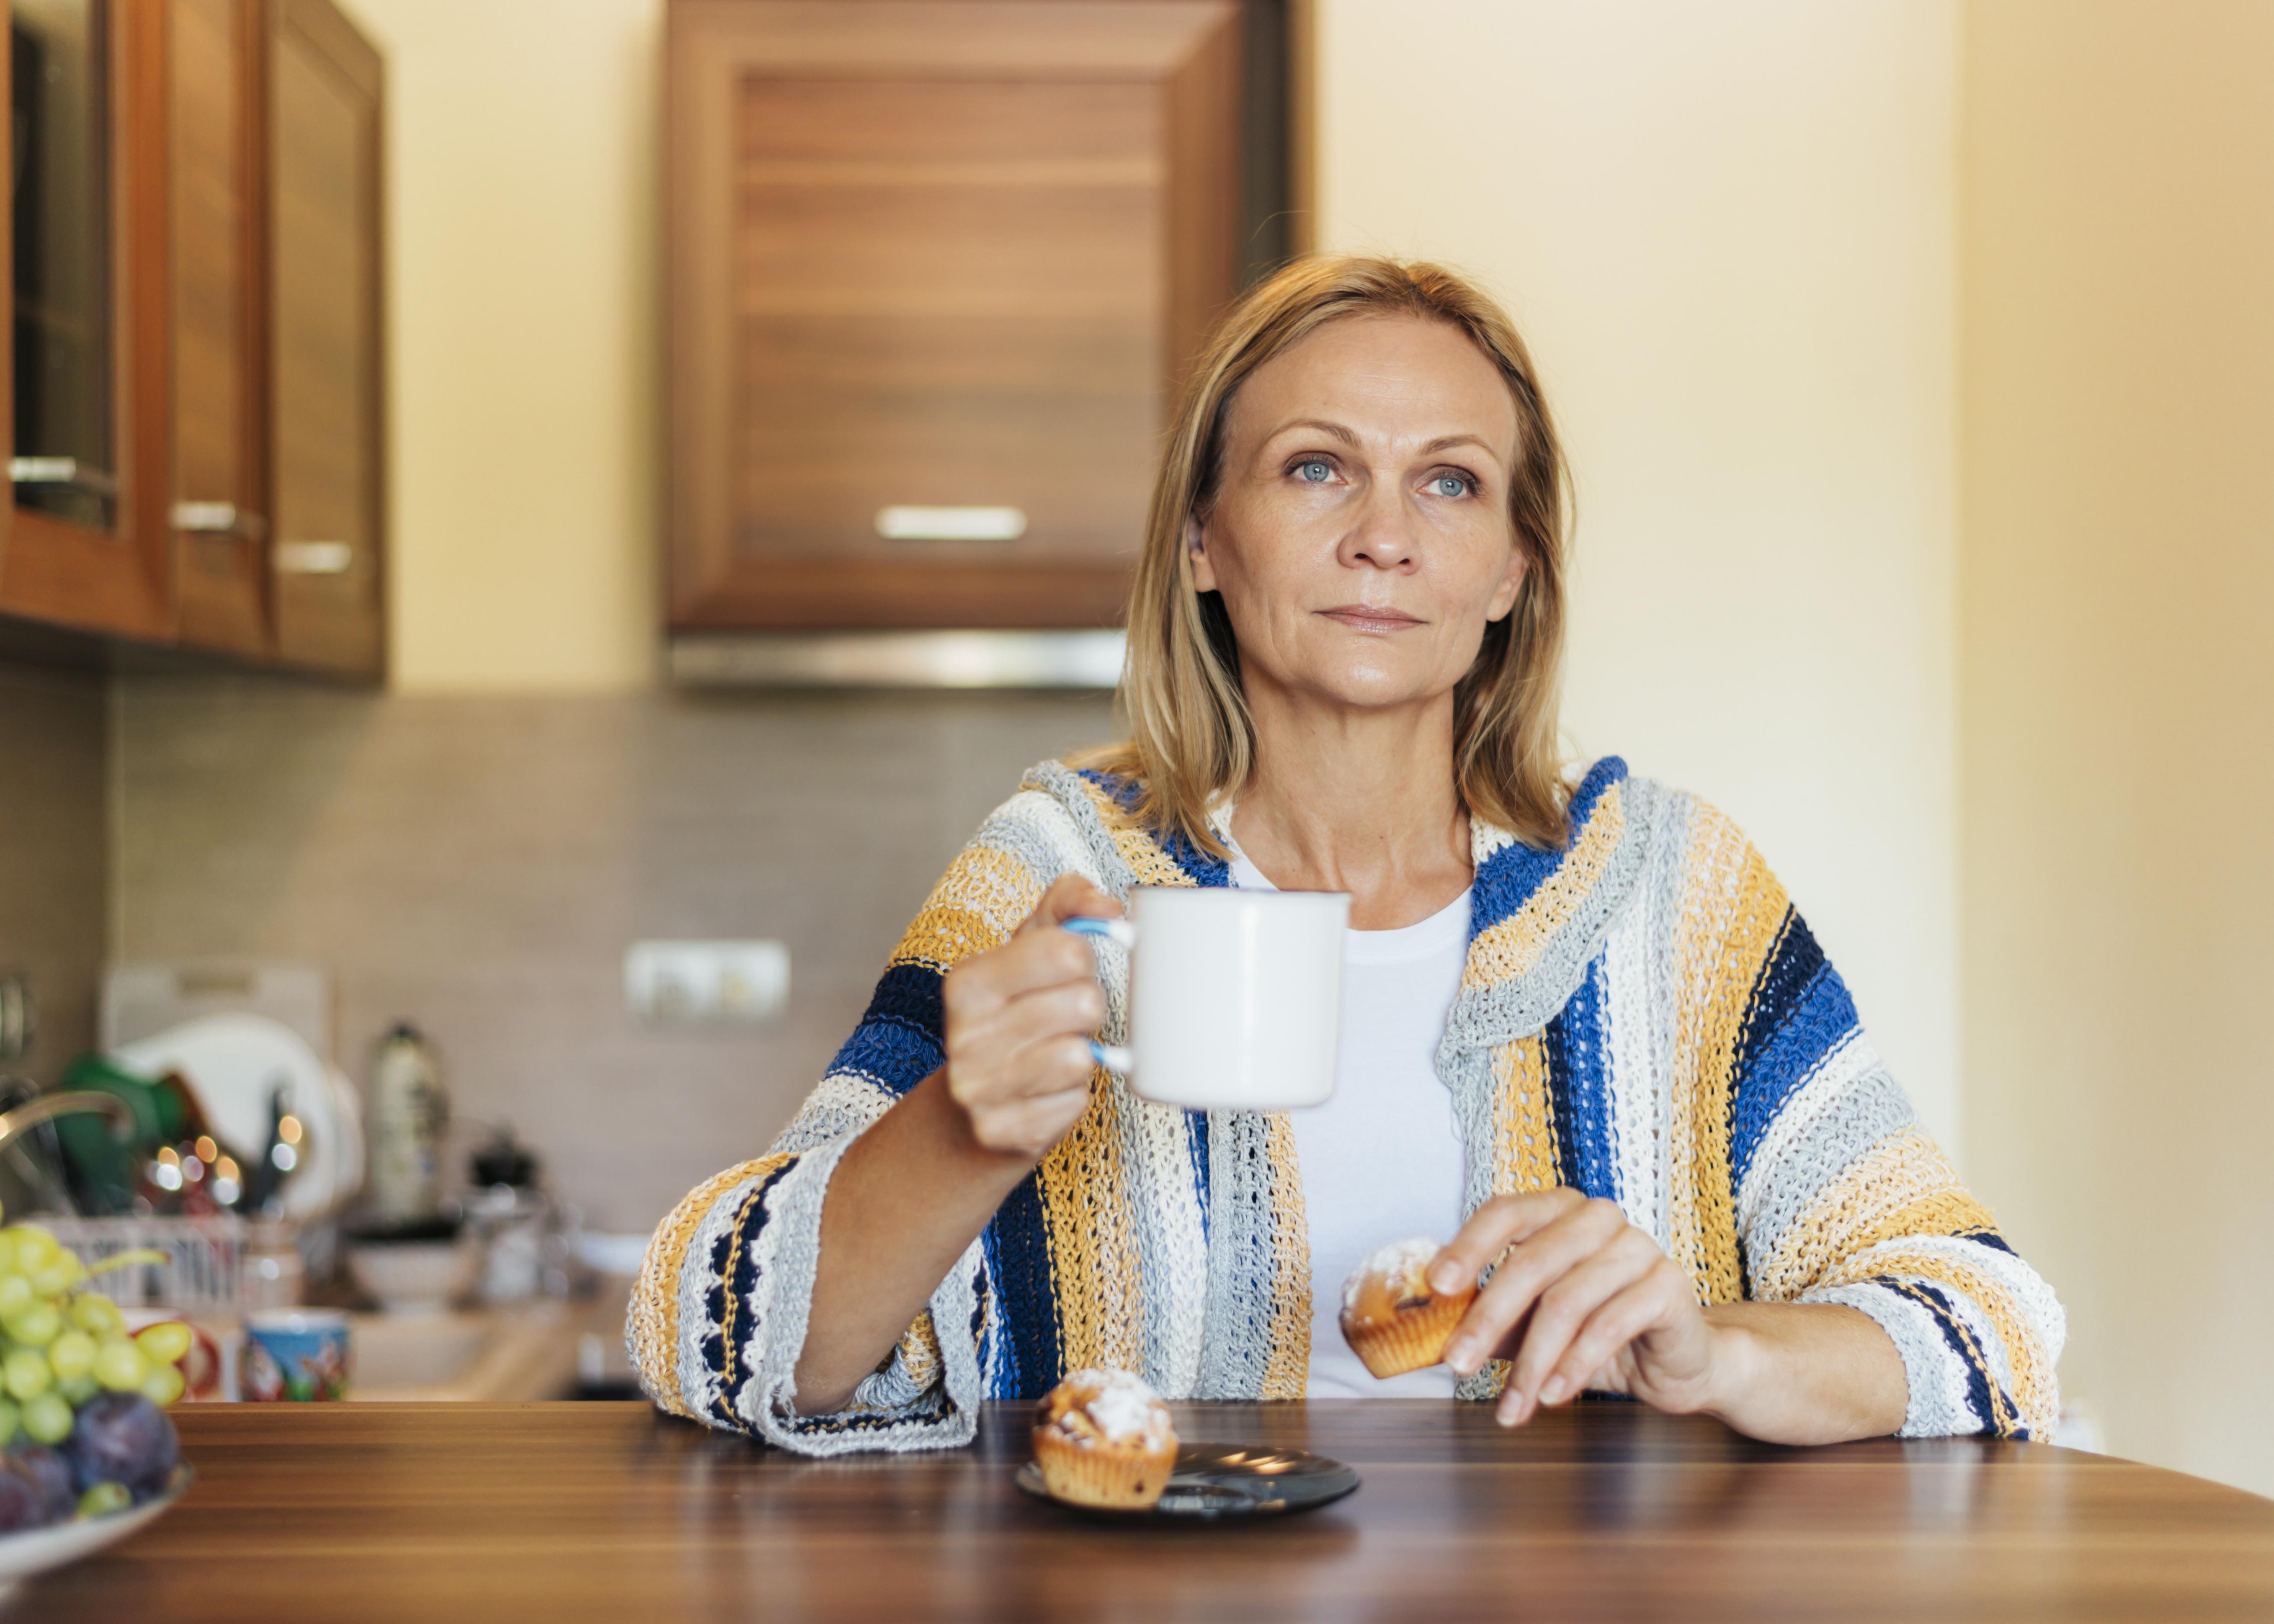 Woman in the kitchen with a cup of tea | Source: Freepik